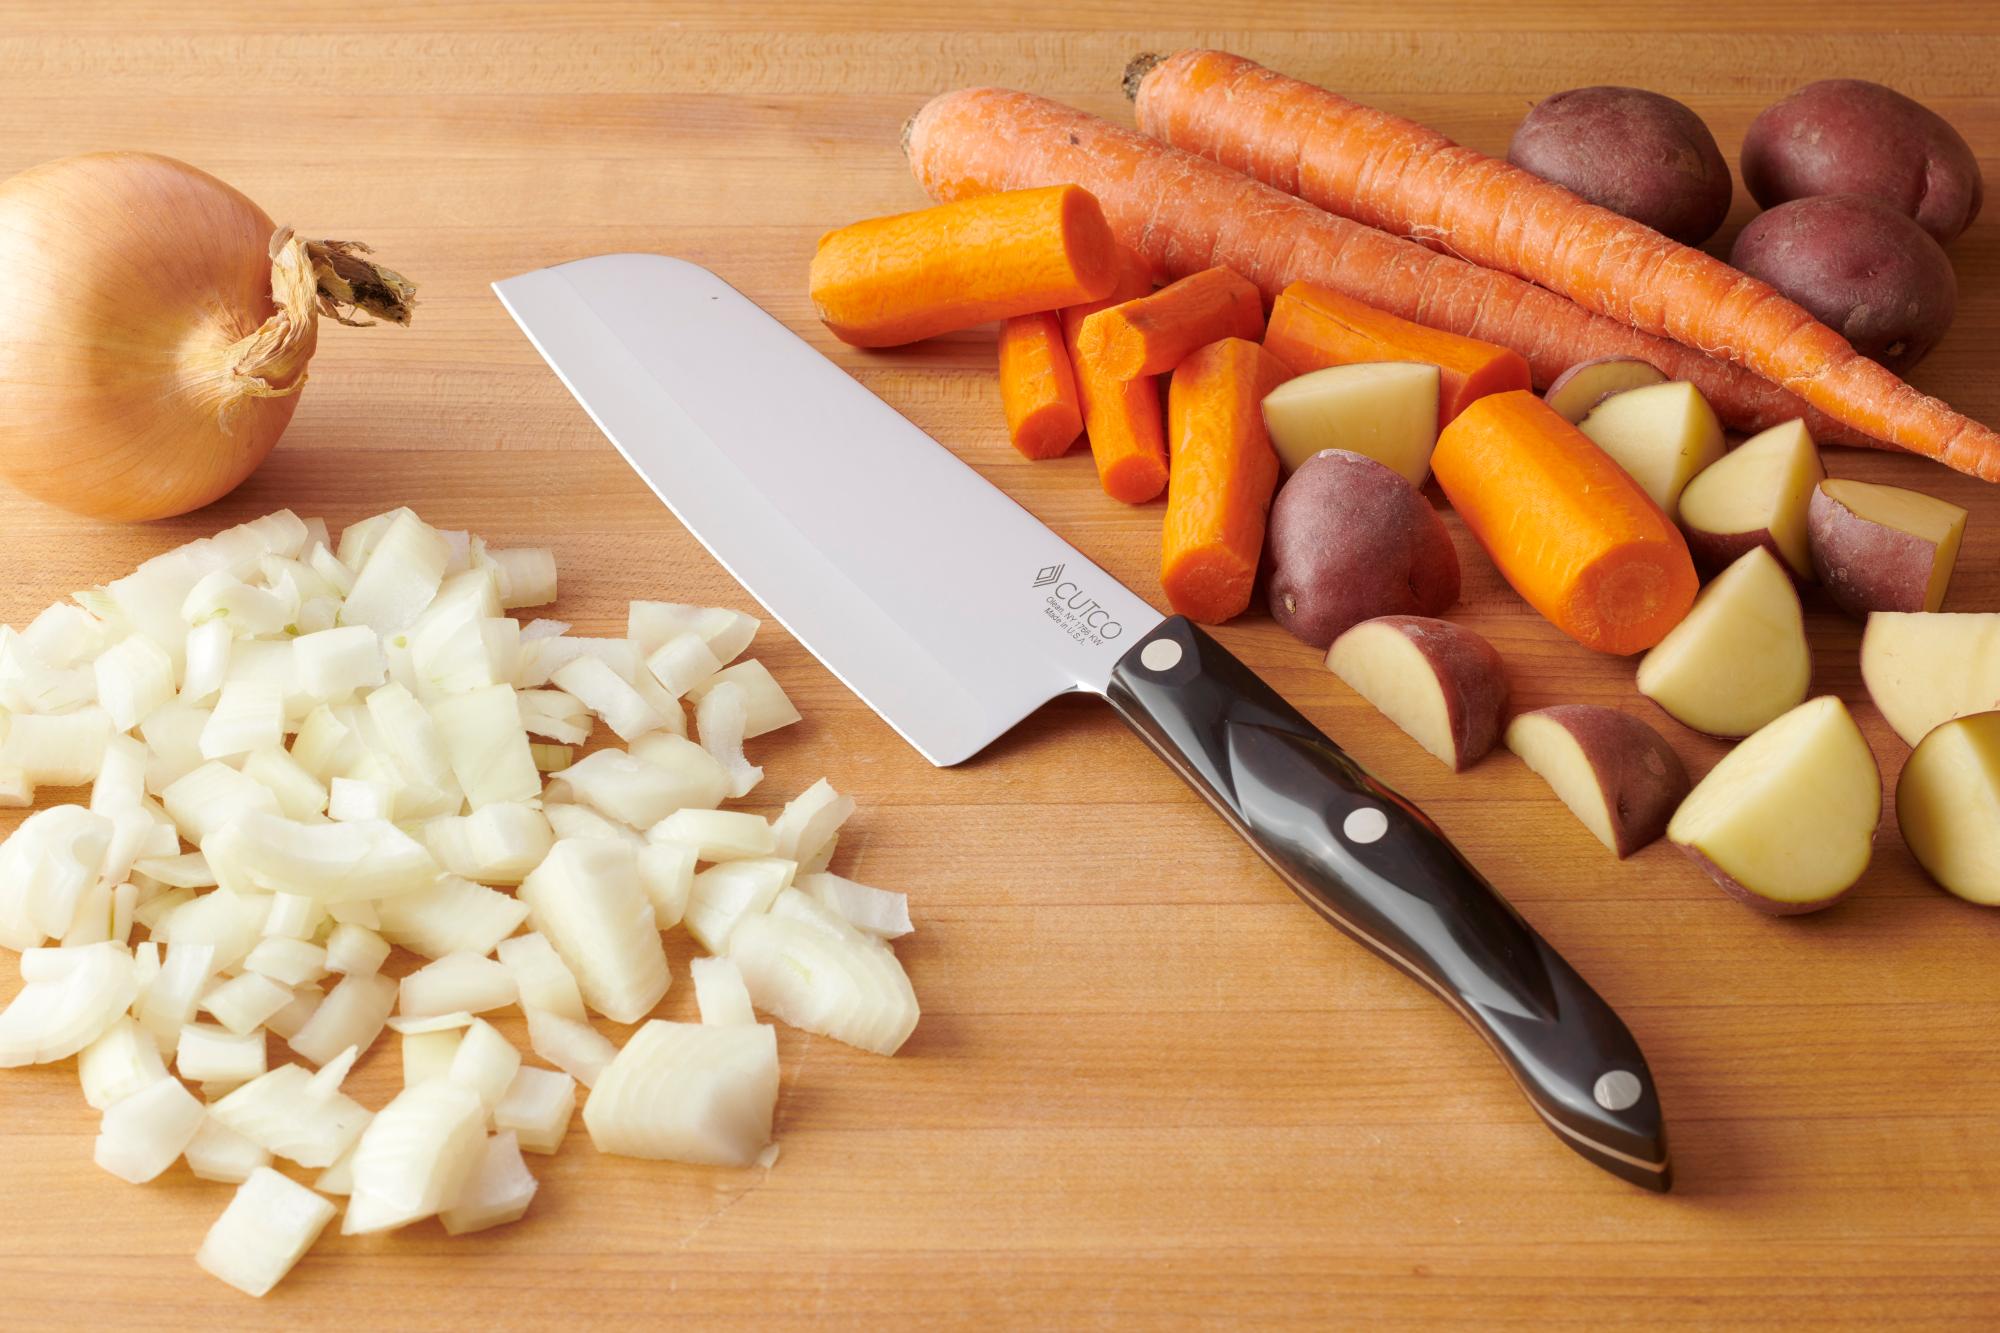 Santoku with prepped ingredients.